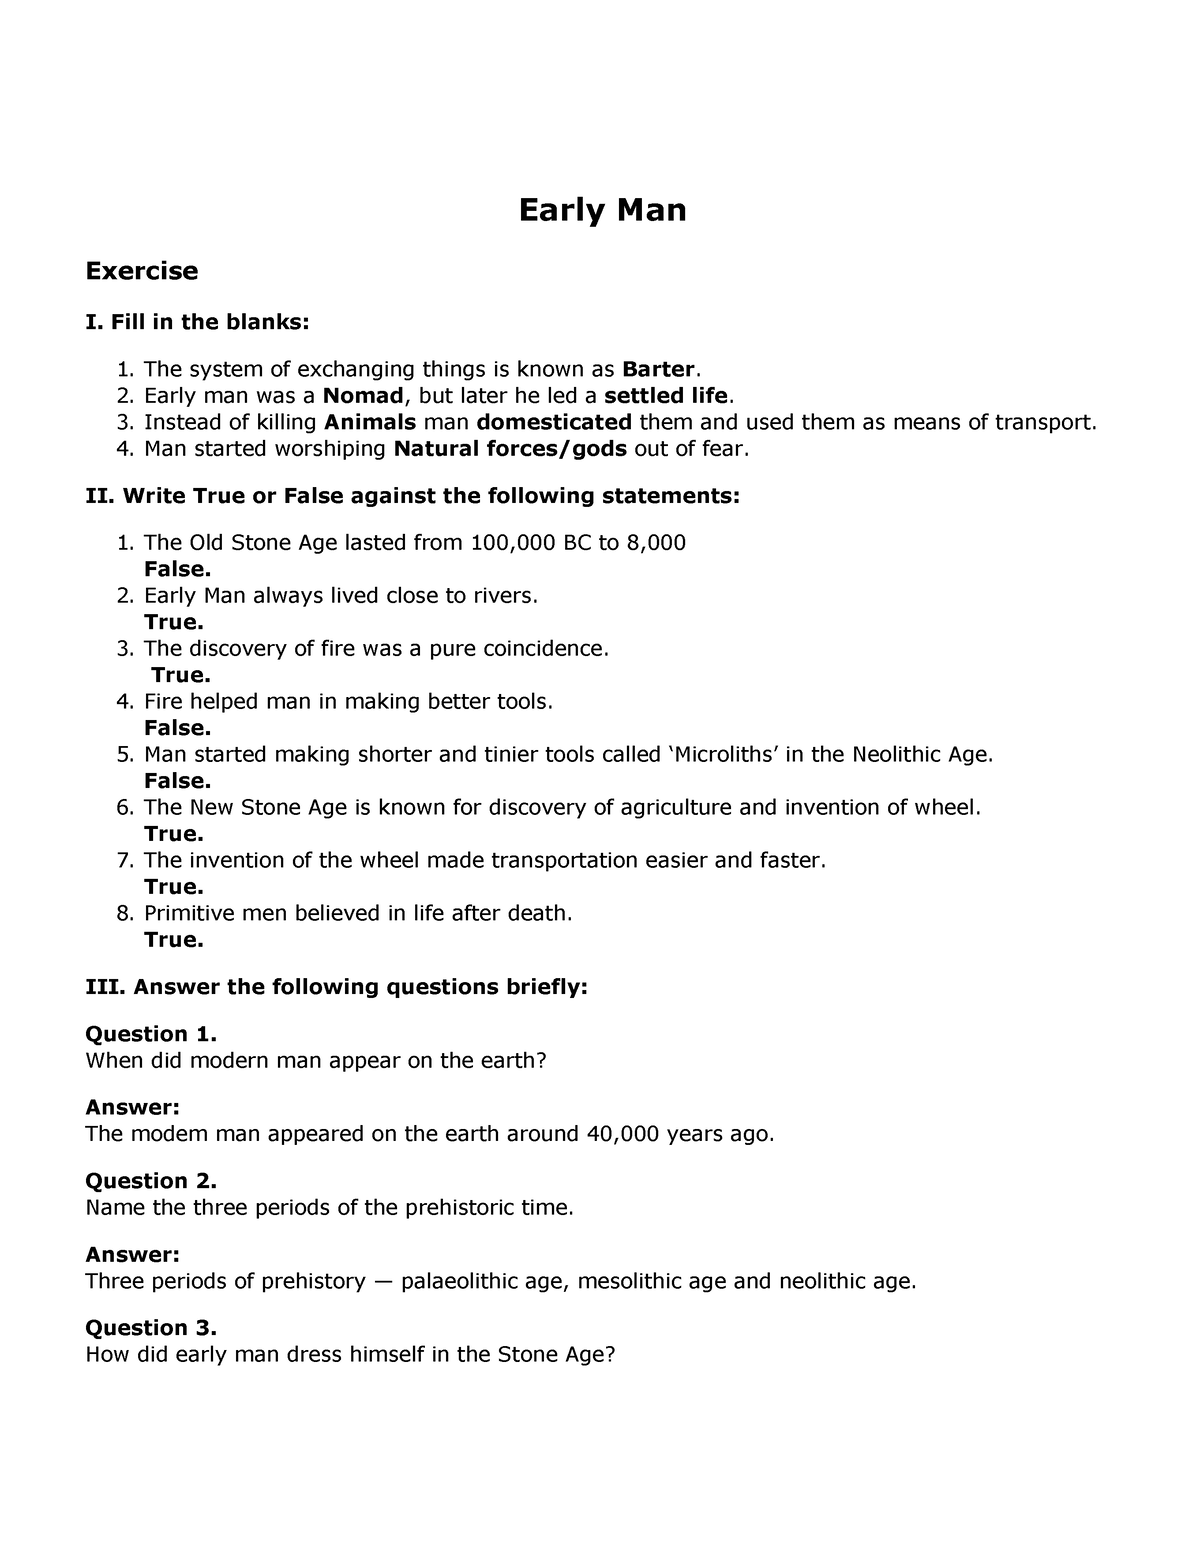 Early Man - notes - ncertbooksolutions Early Man Exercise I. Fill in ...